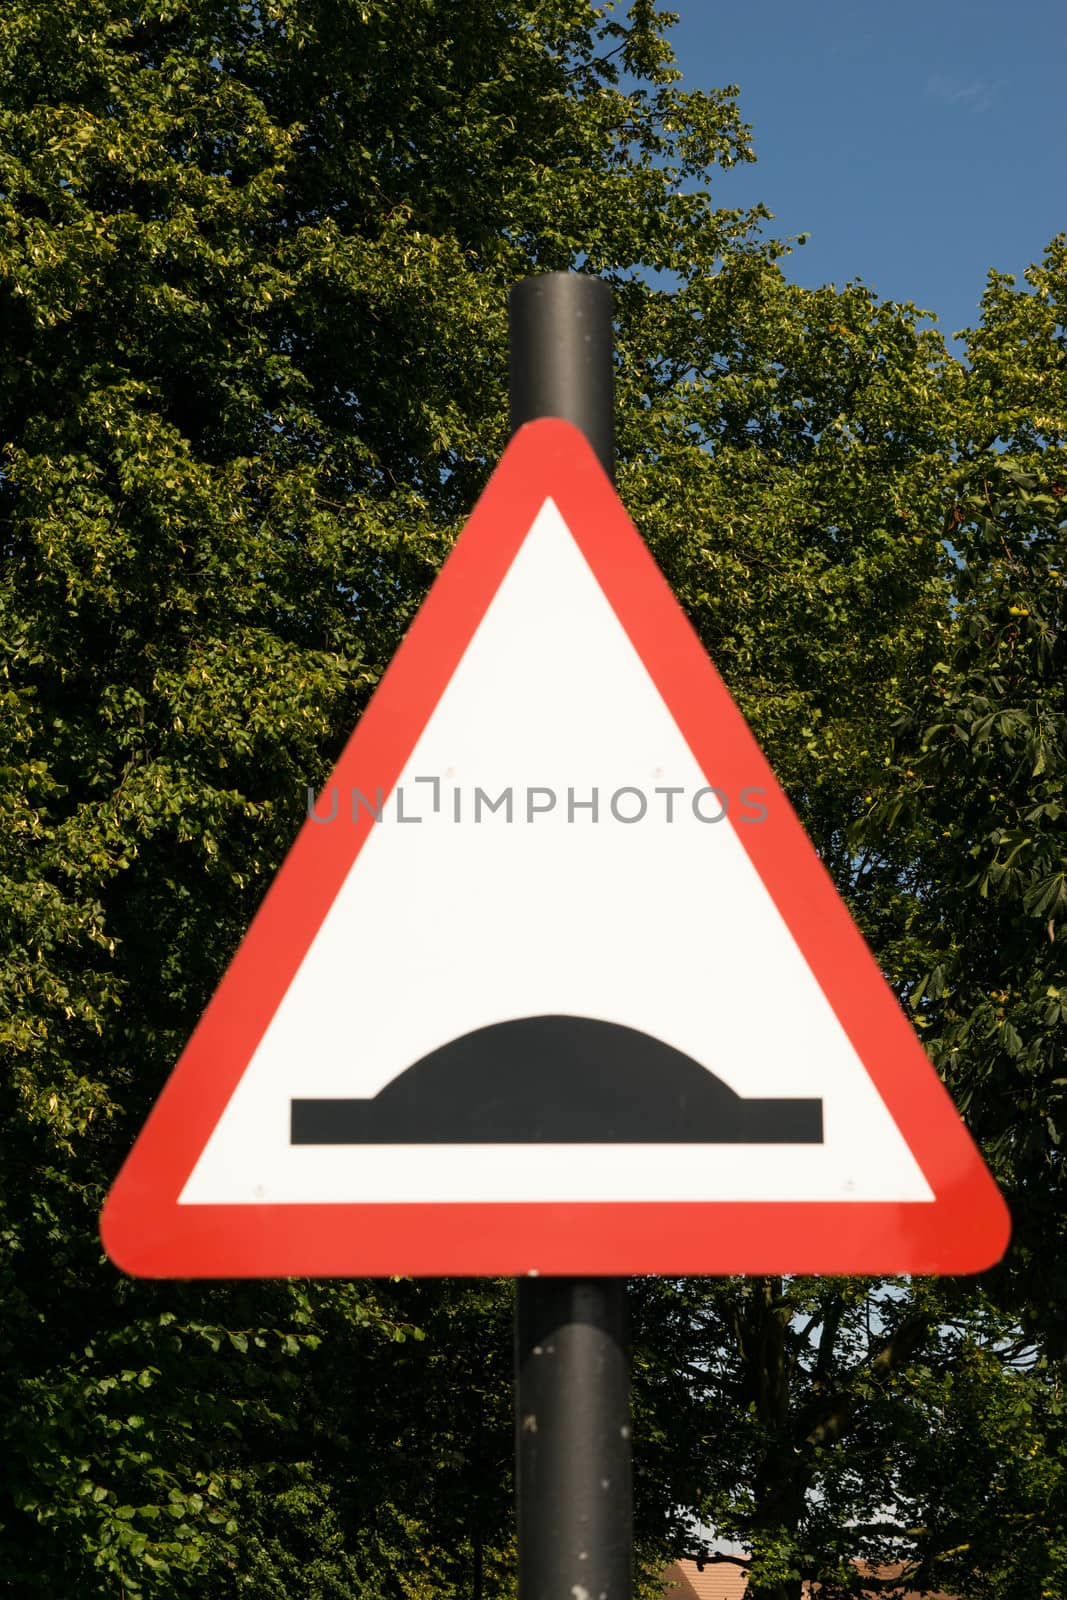 Bump warning traffic sign in a park in GB